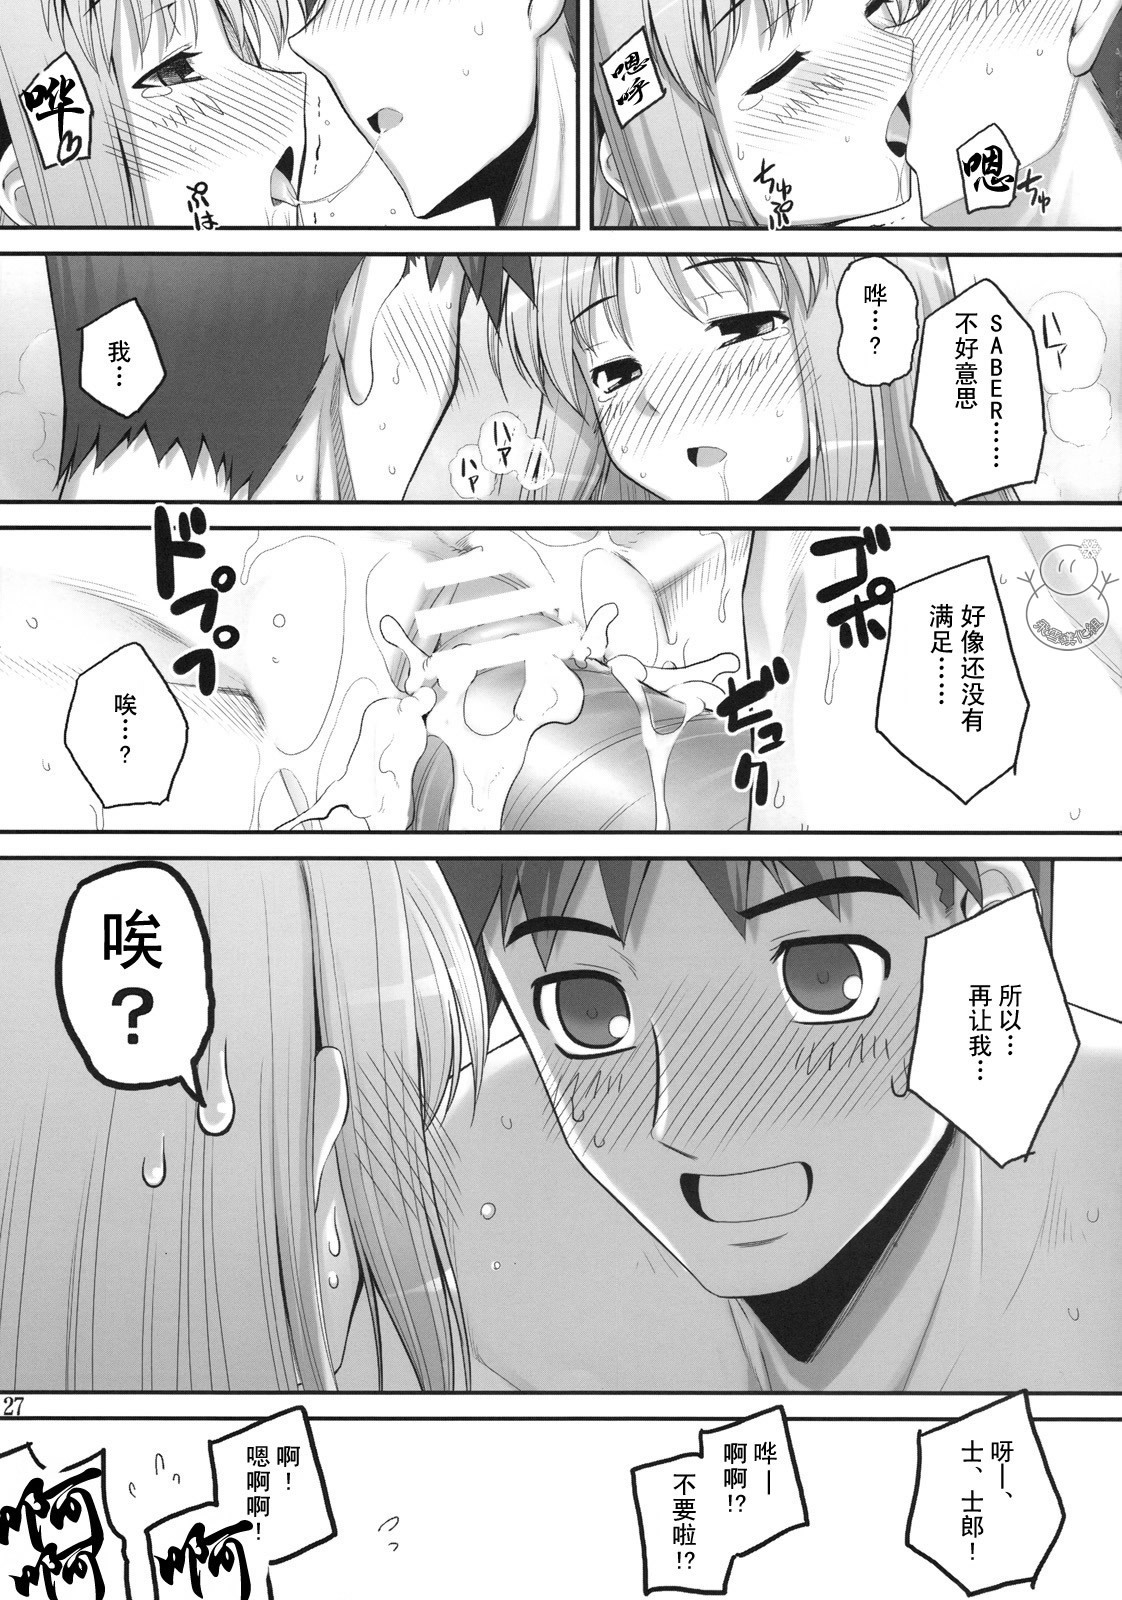 (C75) [RUBBISH Selecting Squad (Namonashi)] RE 10 (Fate/stay night) [Chinese] [飞雪汉化组] page 27 full